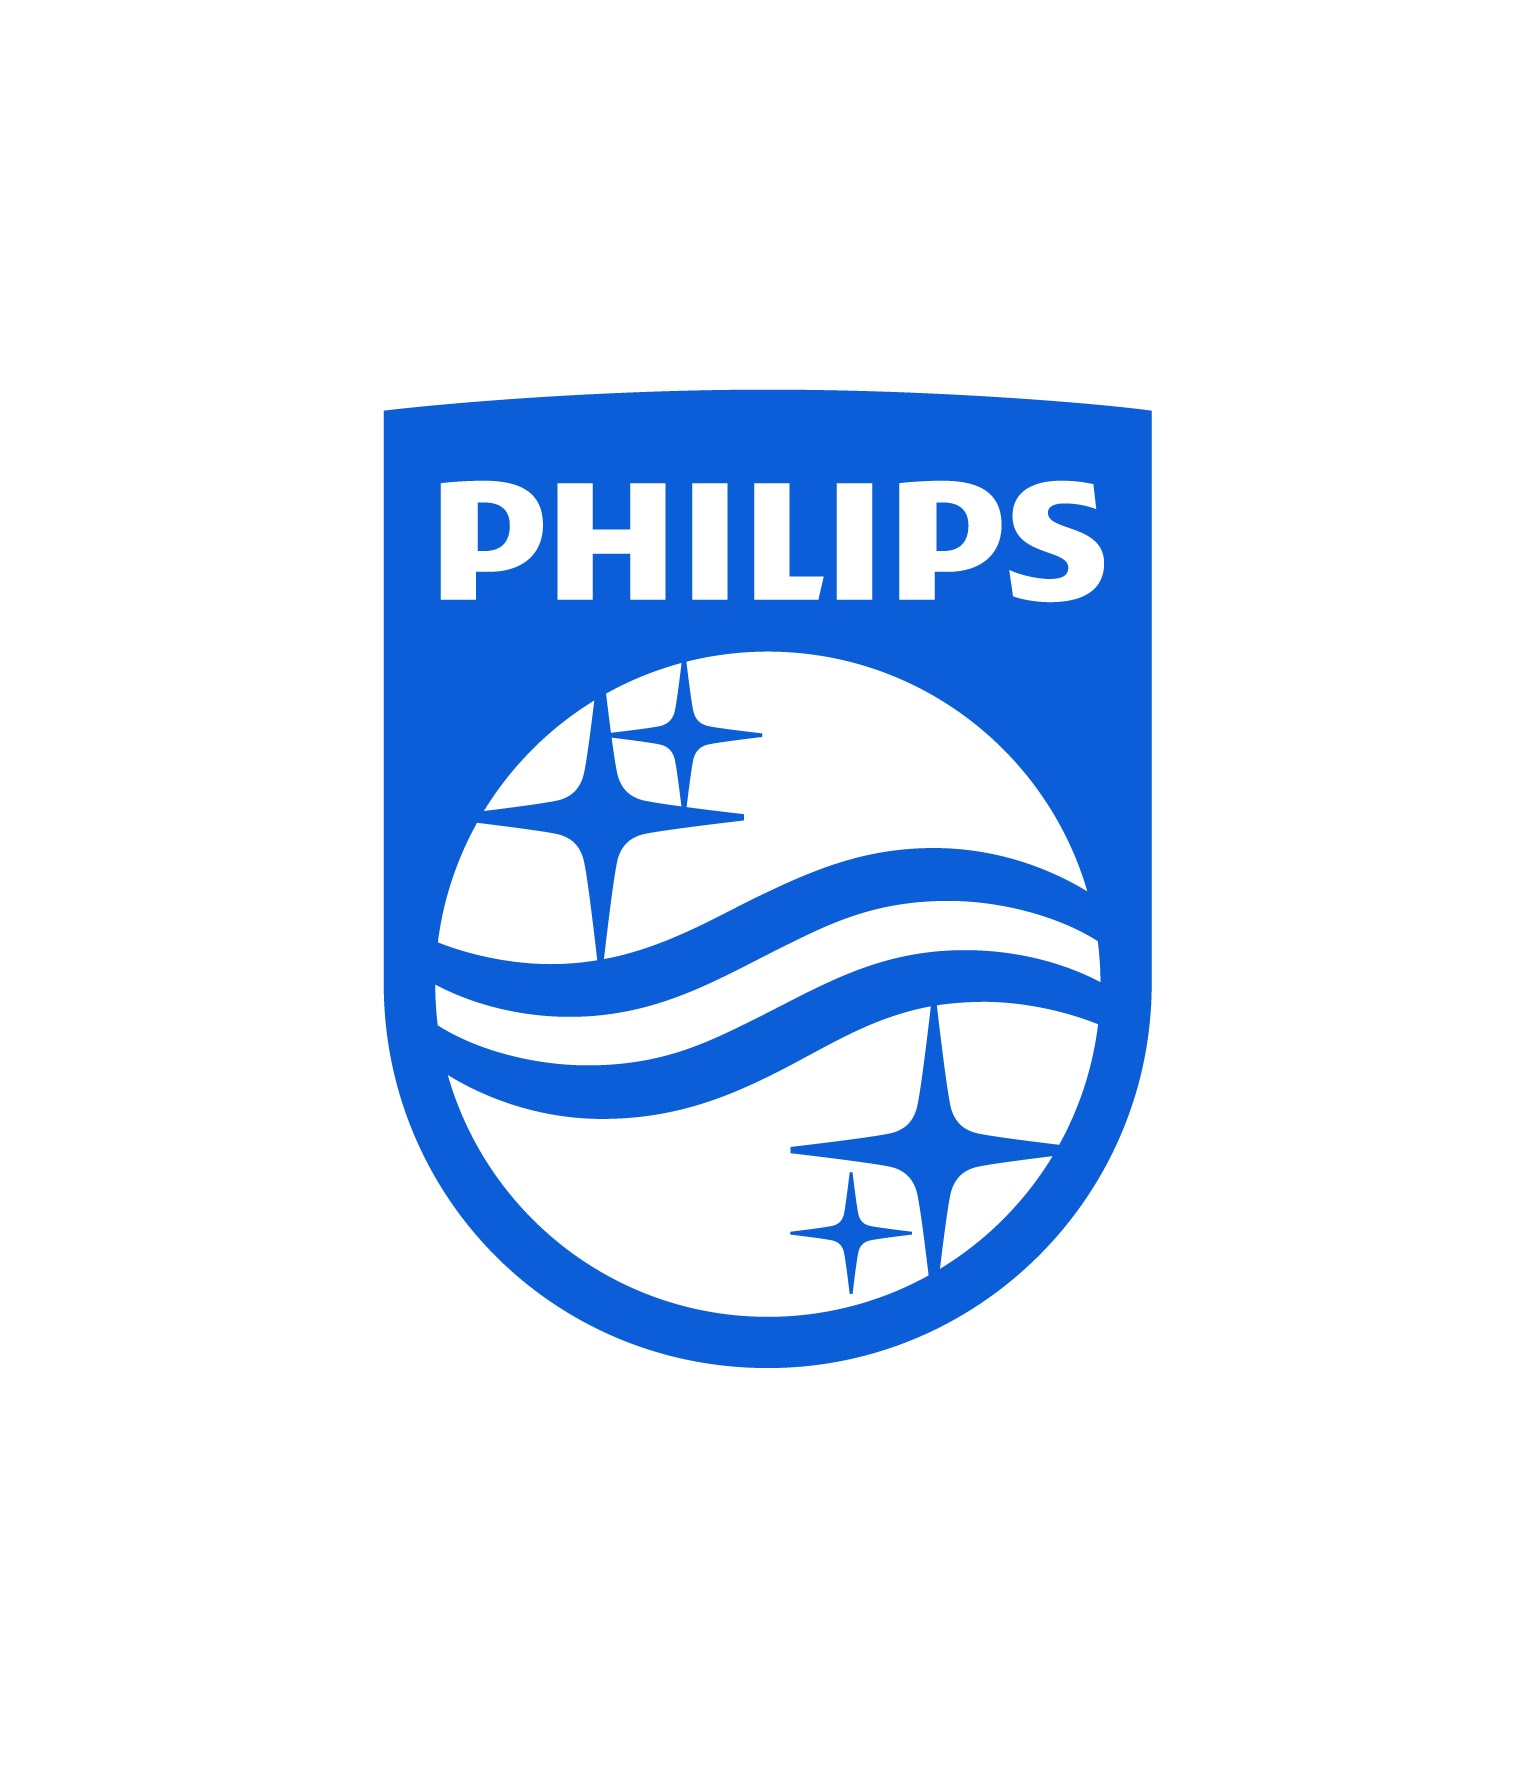 Inside The Philips Brand - Philips, Transparent background PNG HD thumbnail